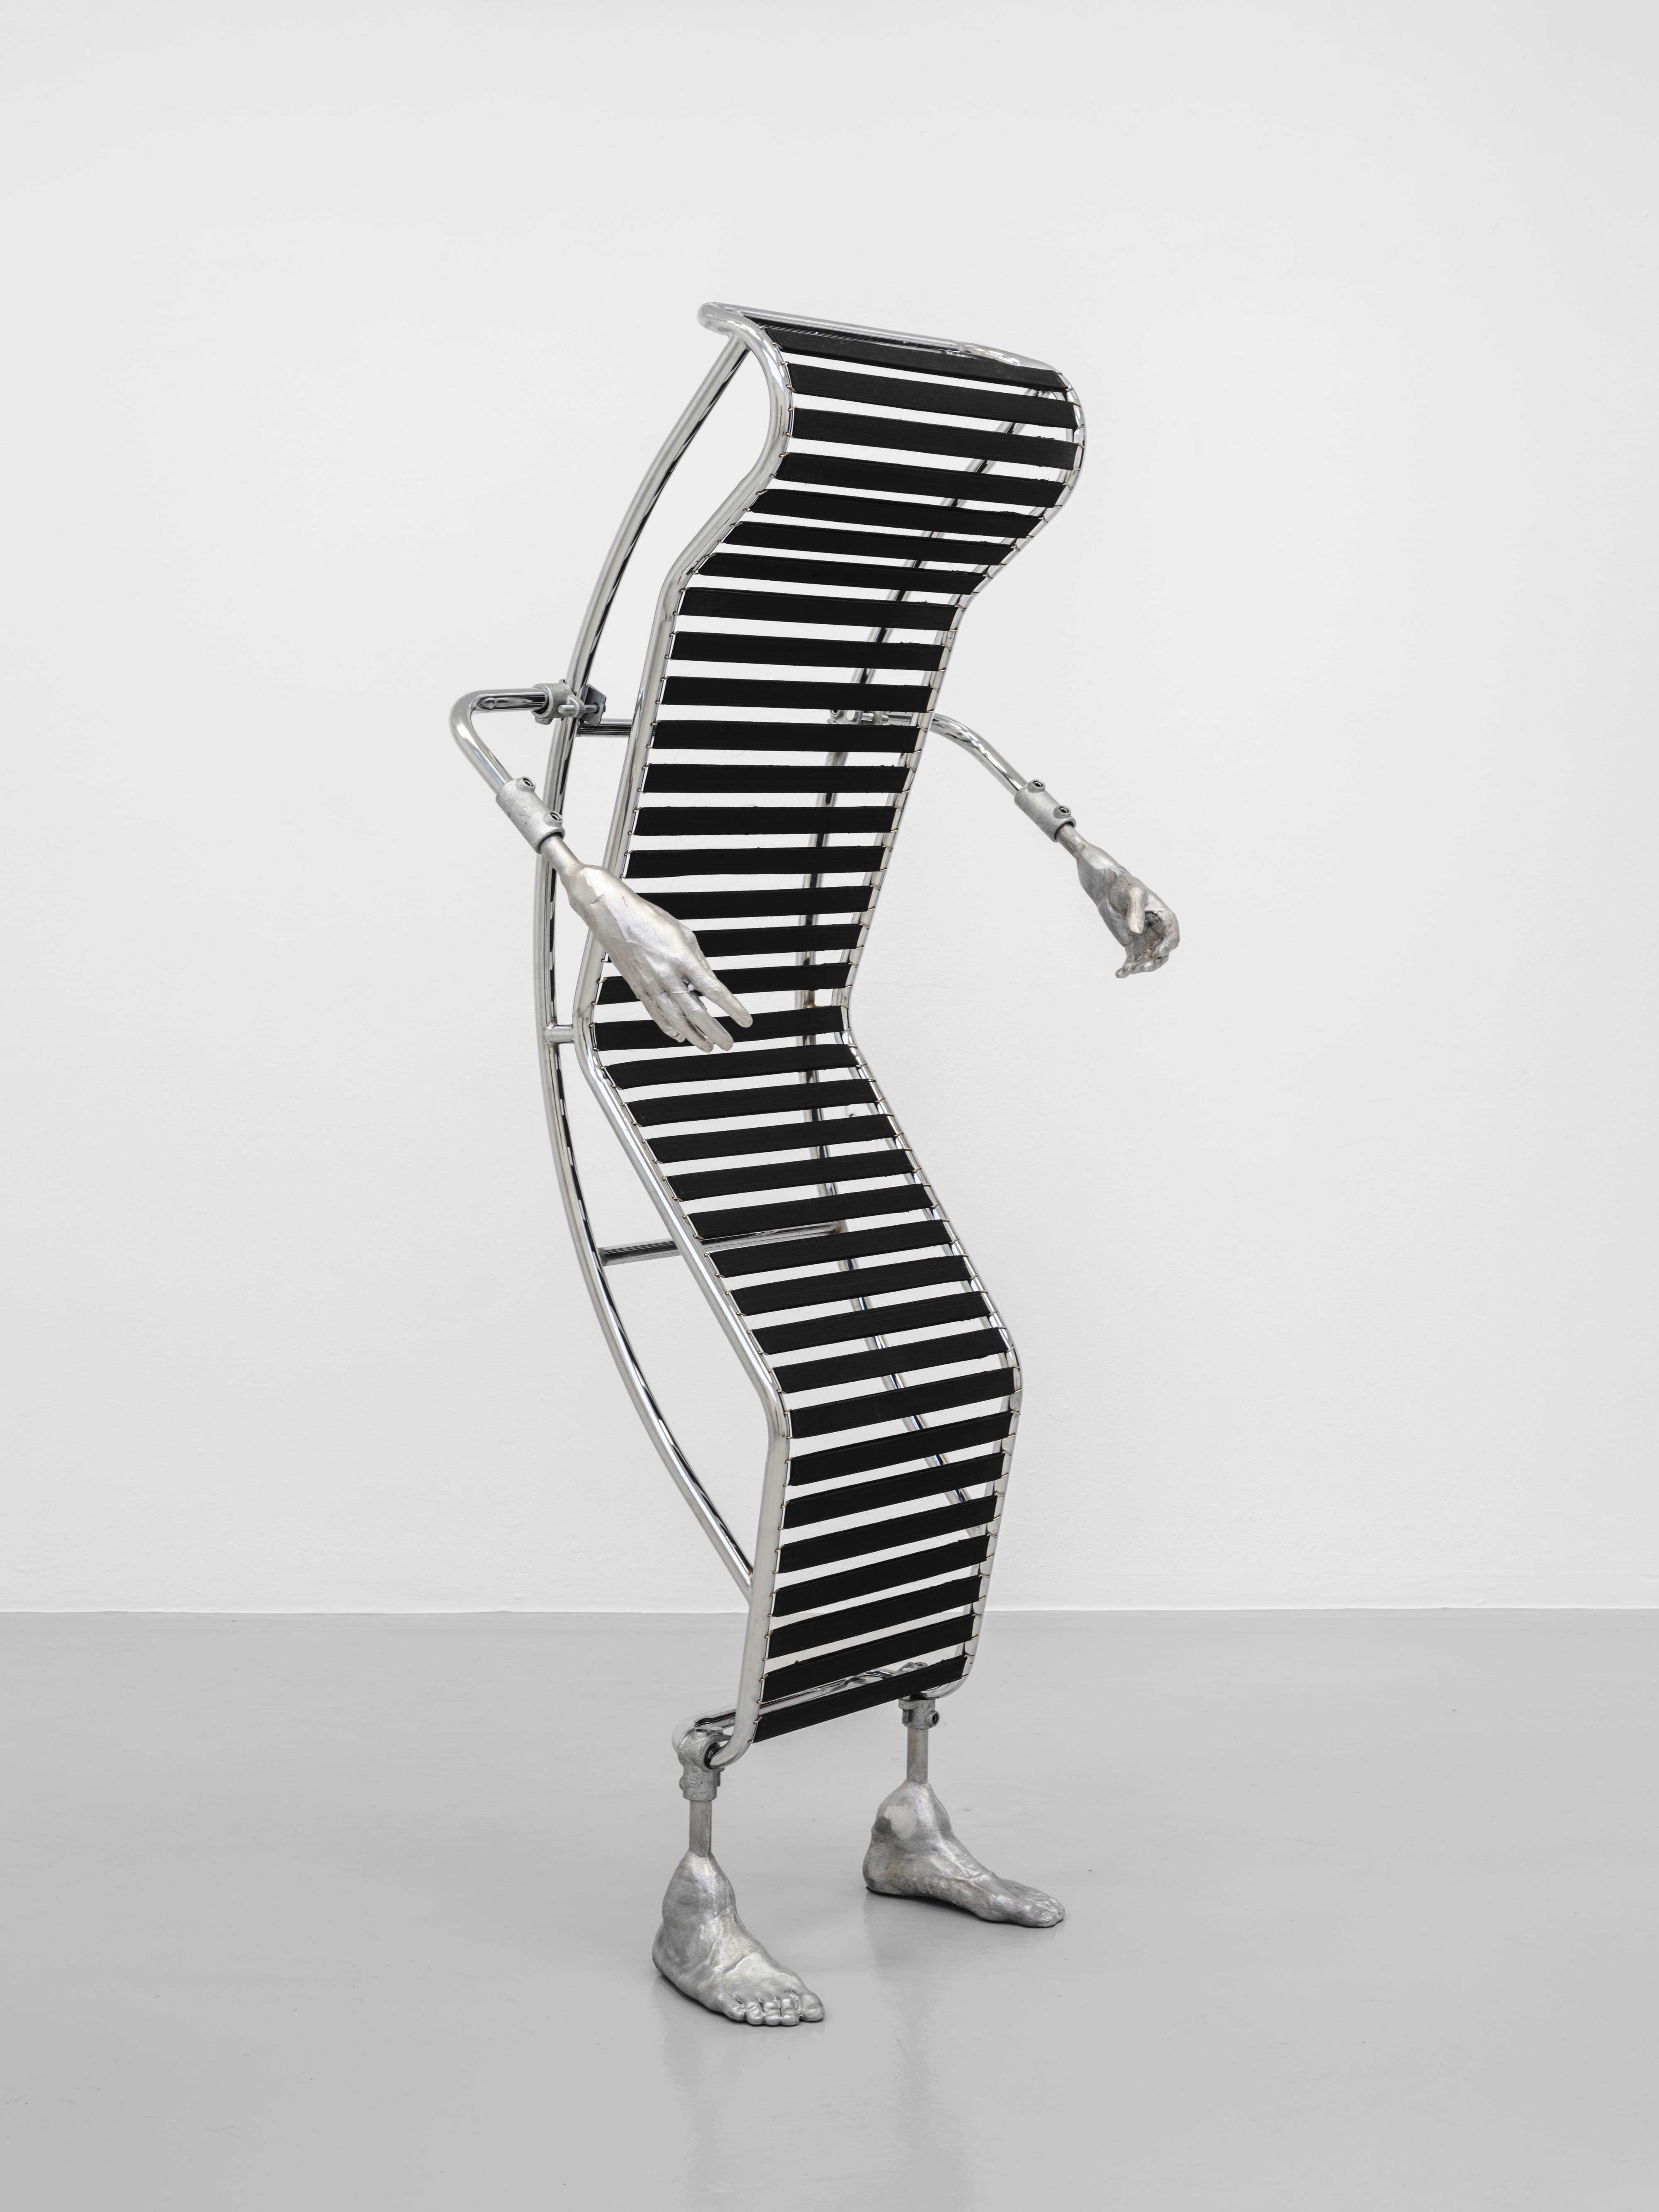 Stansmaschine, Cast Aluminium, Scaffolding Joints, Chaise longue basculante by Charlotte Perriand 185 x 80 x 40 cm